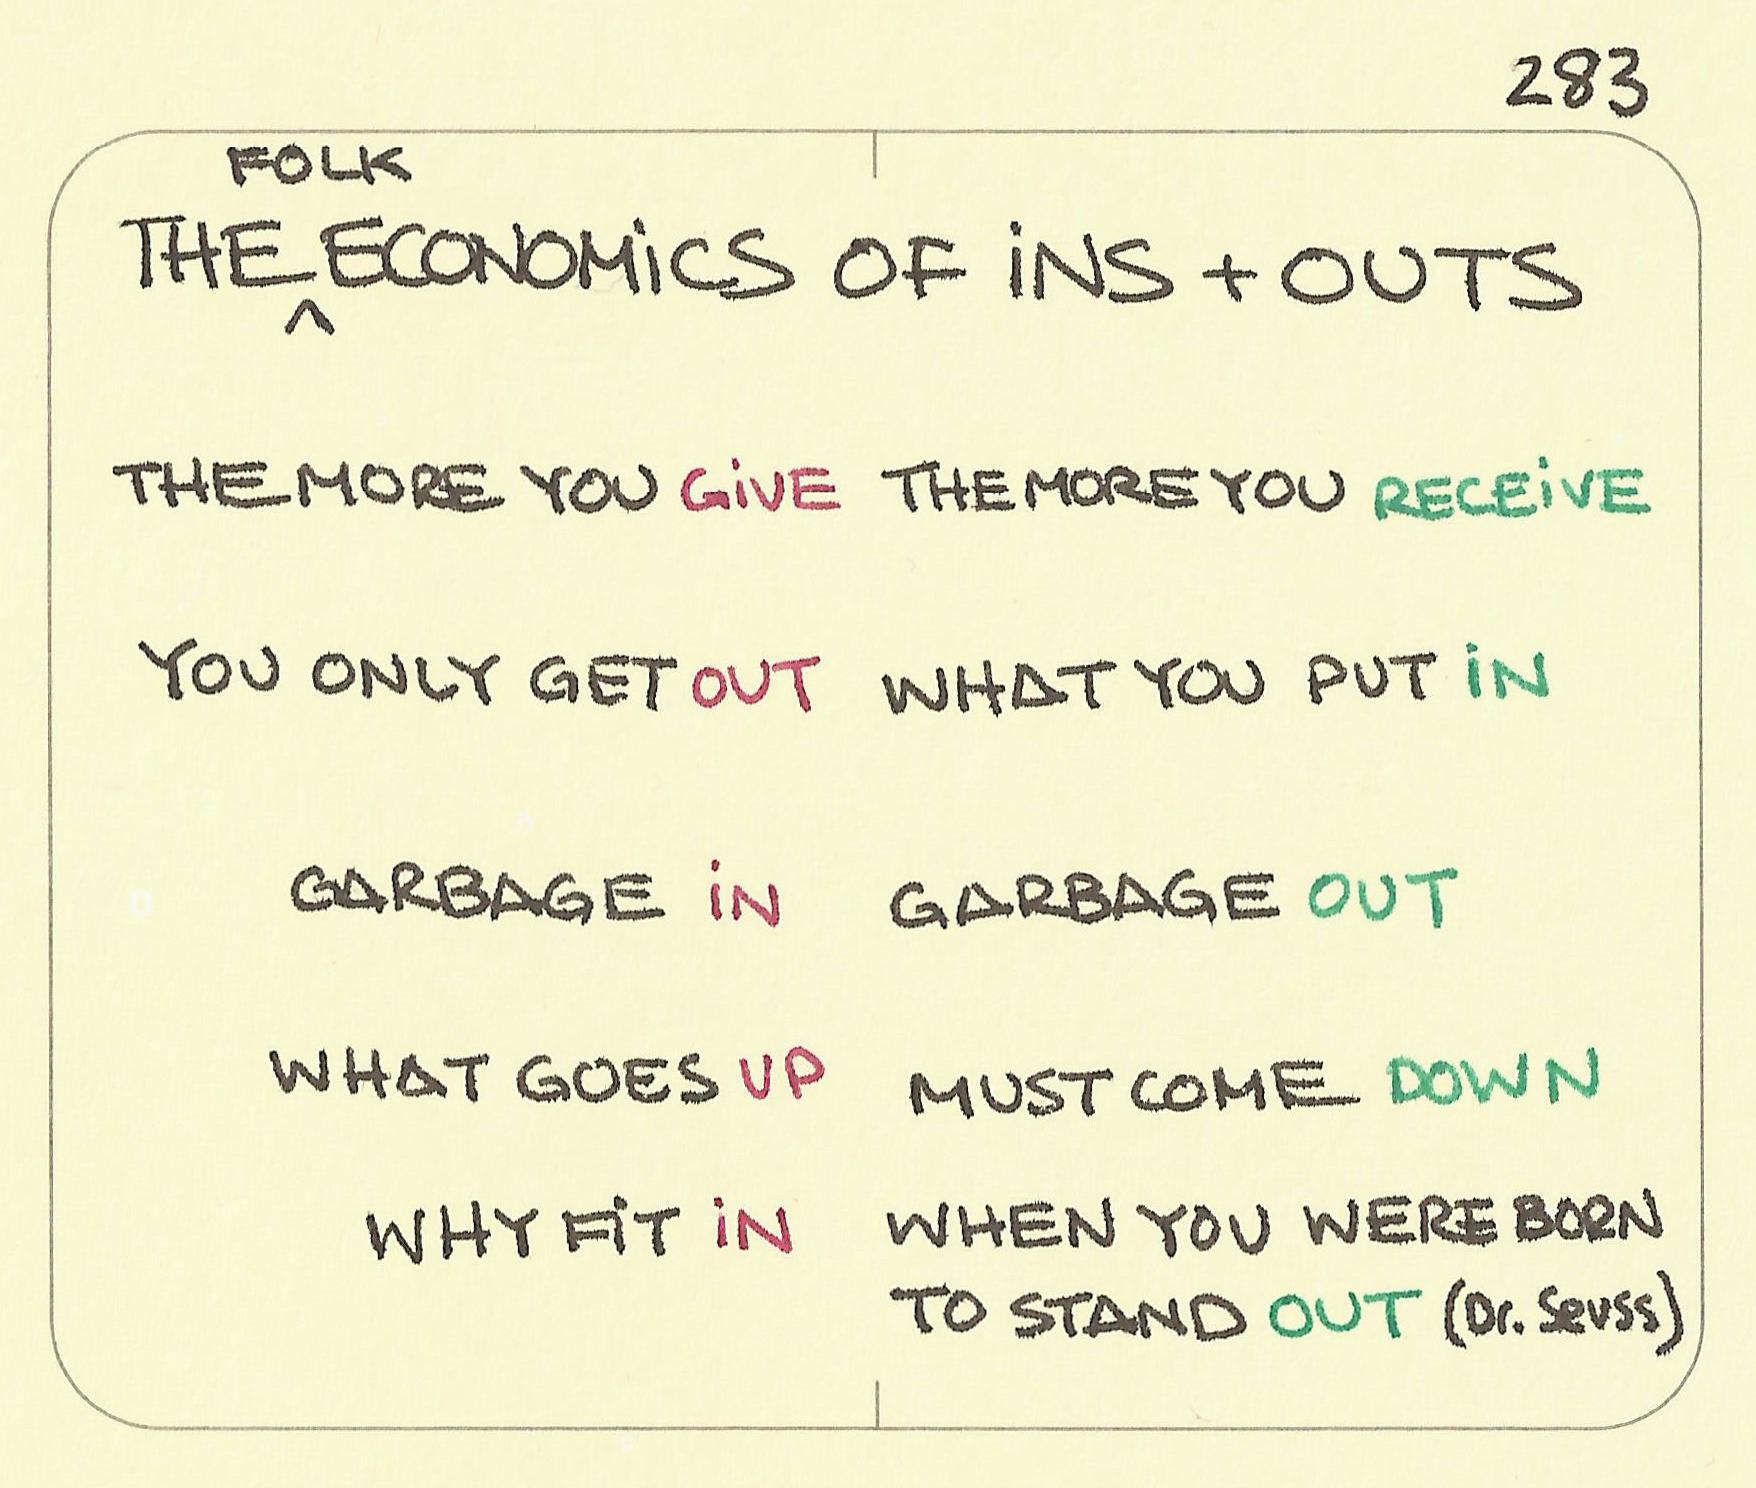 The folk economics of ins and outs - Sketchplanations